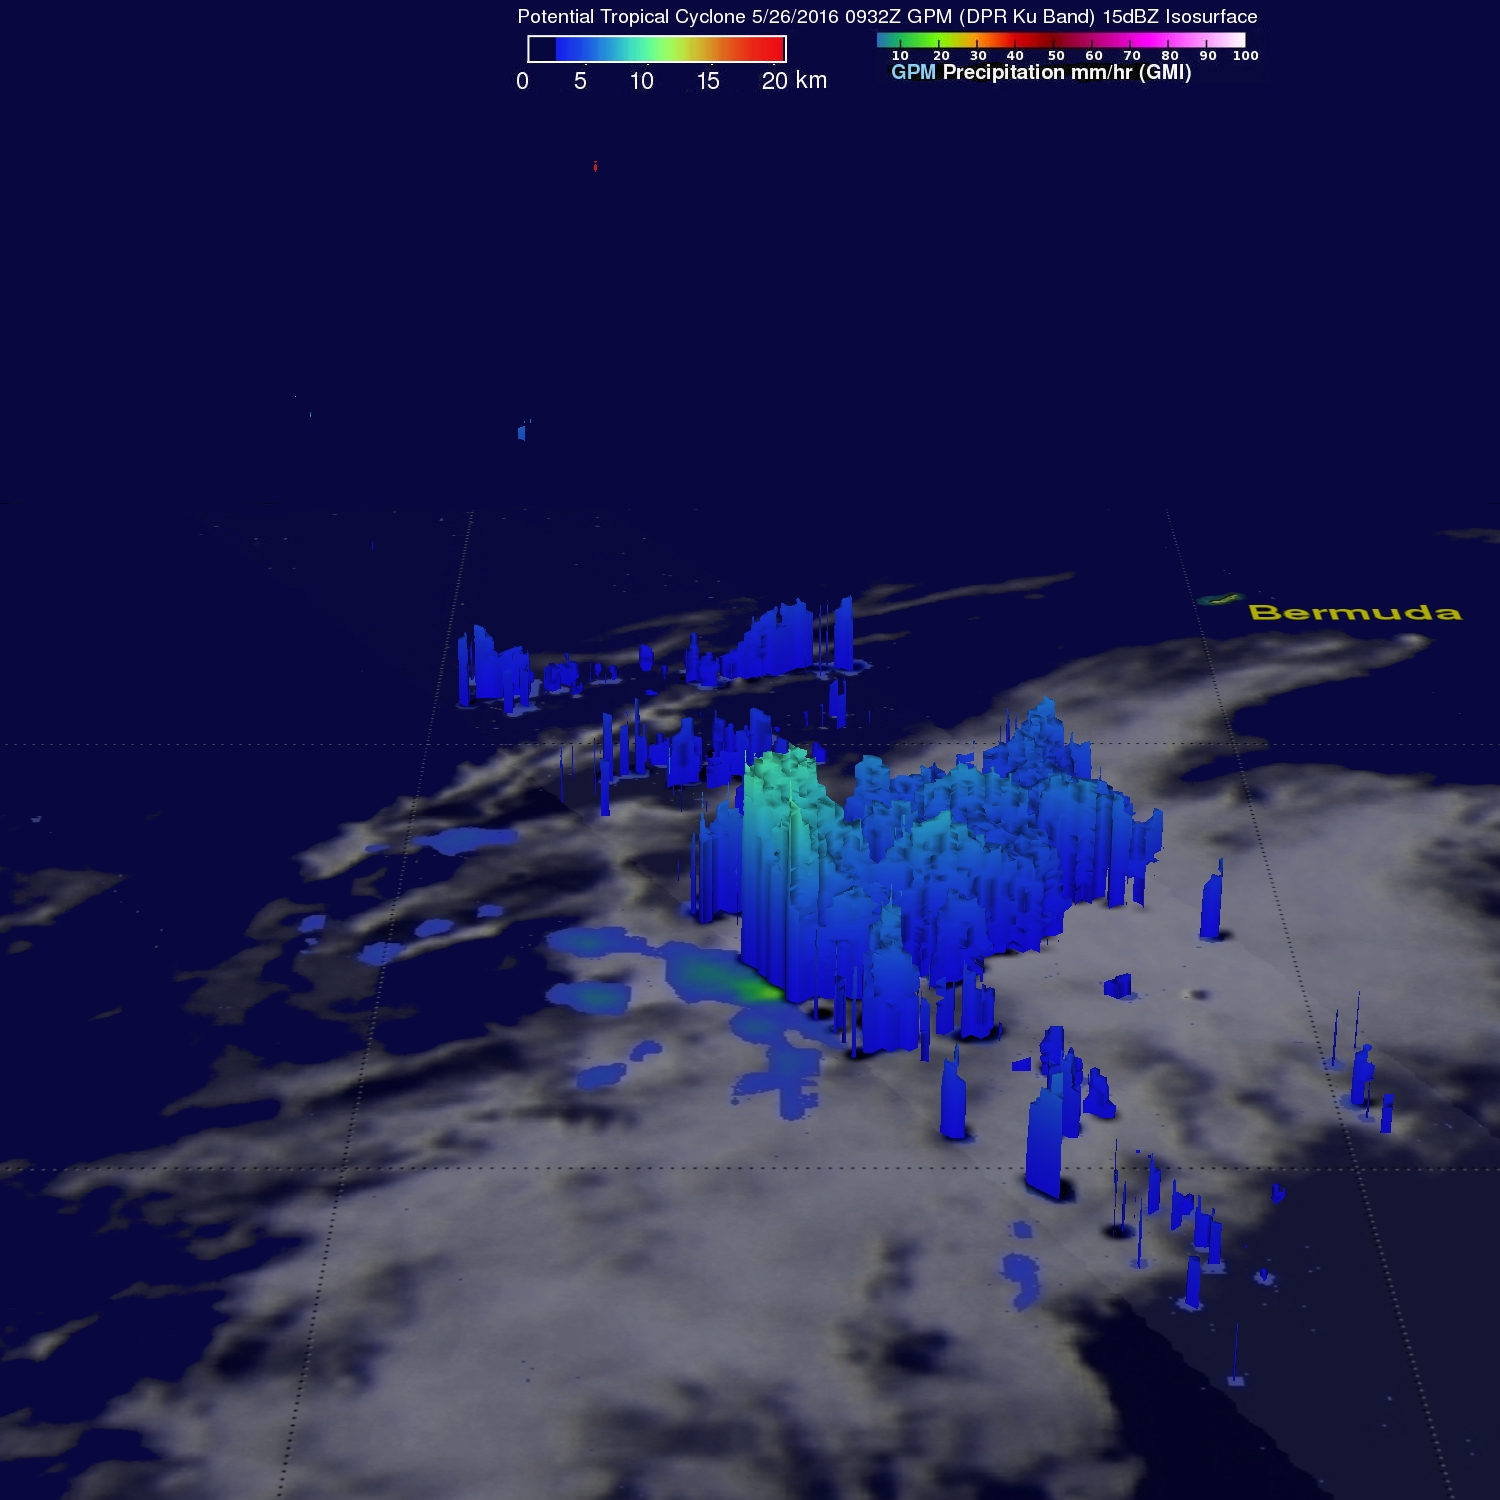 GPM data was used to show the 3-D vertical structure of rainfall within the potential cyclone. 